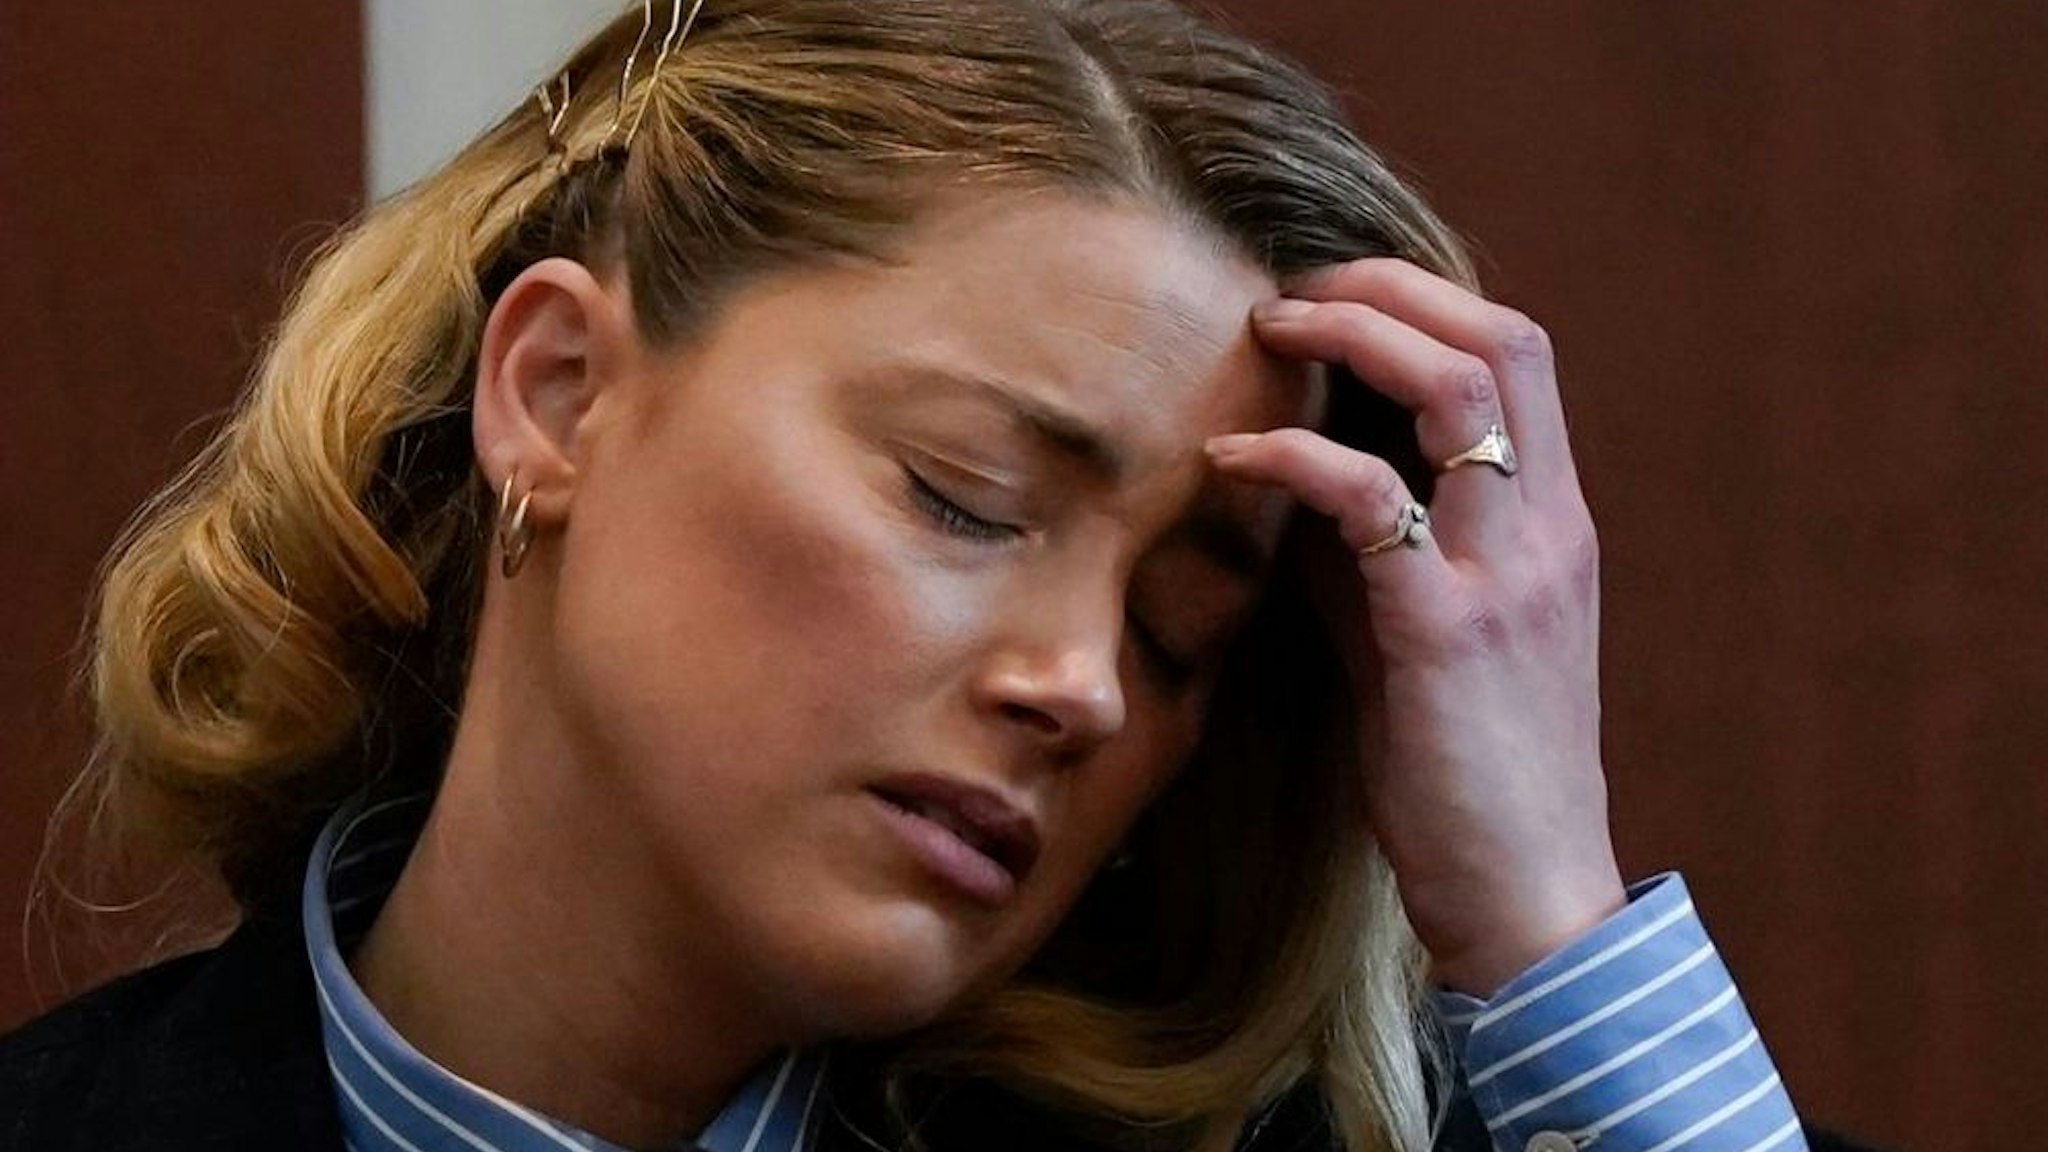 Actor Amber Heard testifies about the first time she says her ex-husband, actor Johnny Depp hit her, at Fairfax County Circuit Court during a defamation case against her by Depp in Fairfax, Virginia, on May 4, 2022.